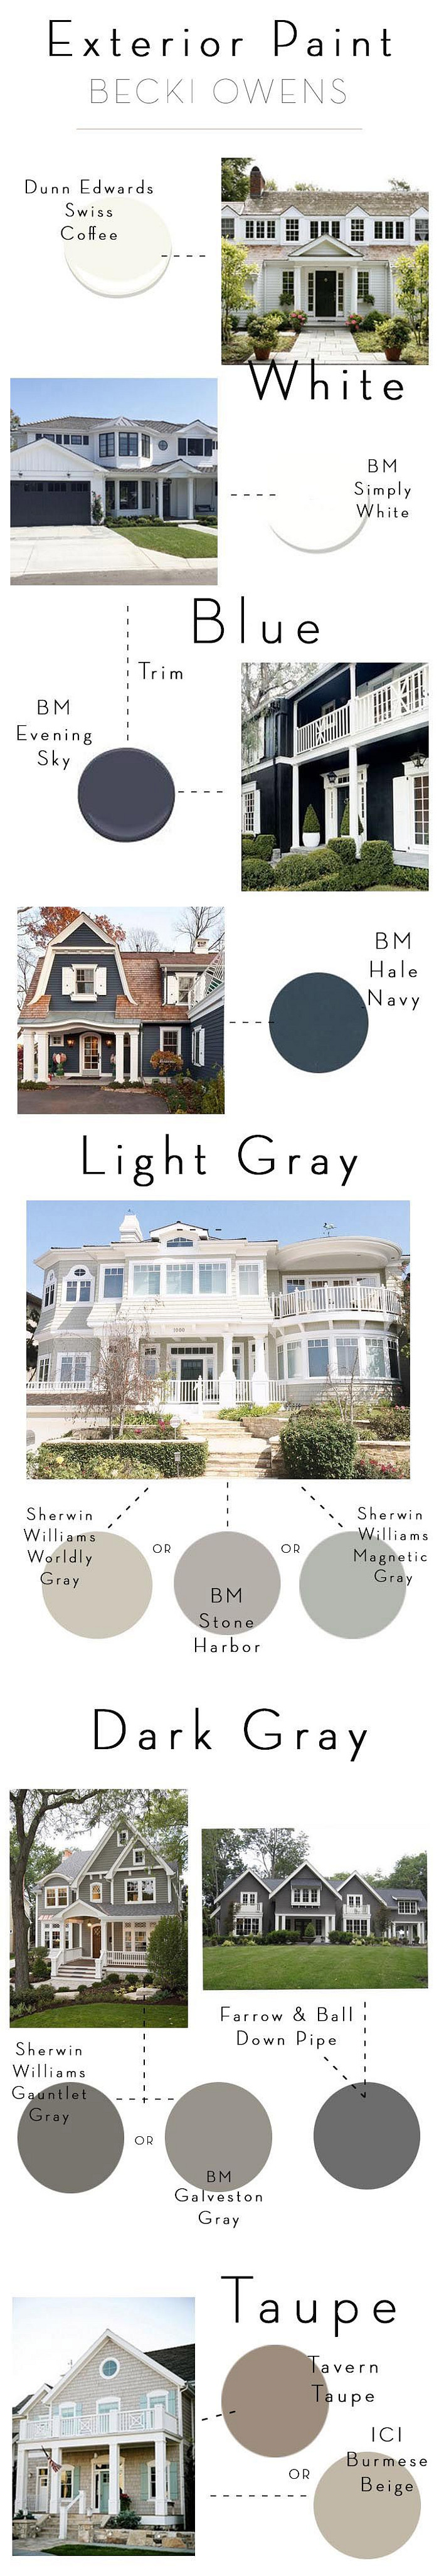 Home Exterior Paint Color Inspiration: White Exterior Paint Color: Swiss Coffee Dunn Edwards. Simply White Benjamin Moore. Blue Exterior Paint Colors: Evening Sky Benjamin Moore. Have Navy Benjamin Moore. Light Gray Exterior Paint Colors: Sherwin Williams Worldly Gray. Benjamin Moore Stone Harbor. Sherwin Williams Magnetic Gray. Dark Gray Home Exterior Paint Colors: Sherwin Williams Gauntlet Gray. Farrow and Ball Down Pipe. Benjamin Moore Galveston Gray. Taupe Exterior Paint Colors: Tavern Taupe SW 7508 Sherwin-Williams. Burmese Beige ICI. #HomeExterior #PaintColor #Exterior #PaintColor #Inspiration Via Becki Owens.